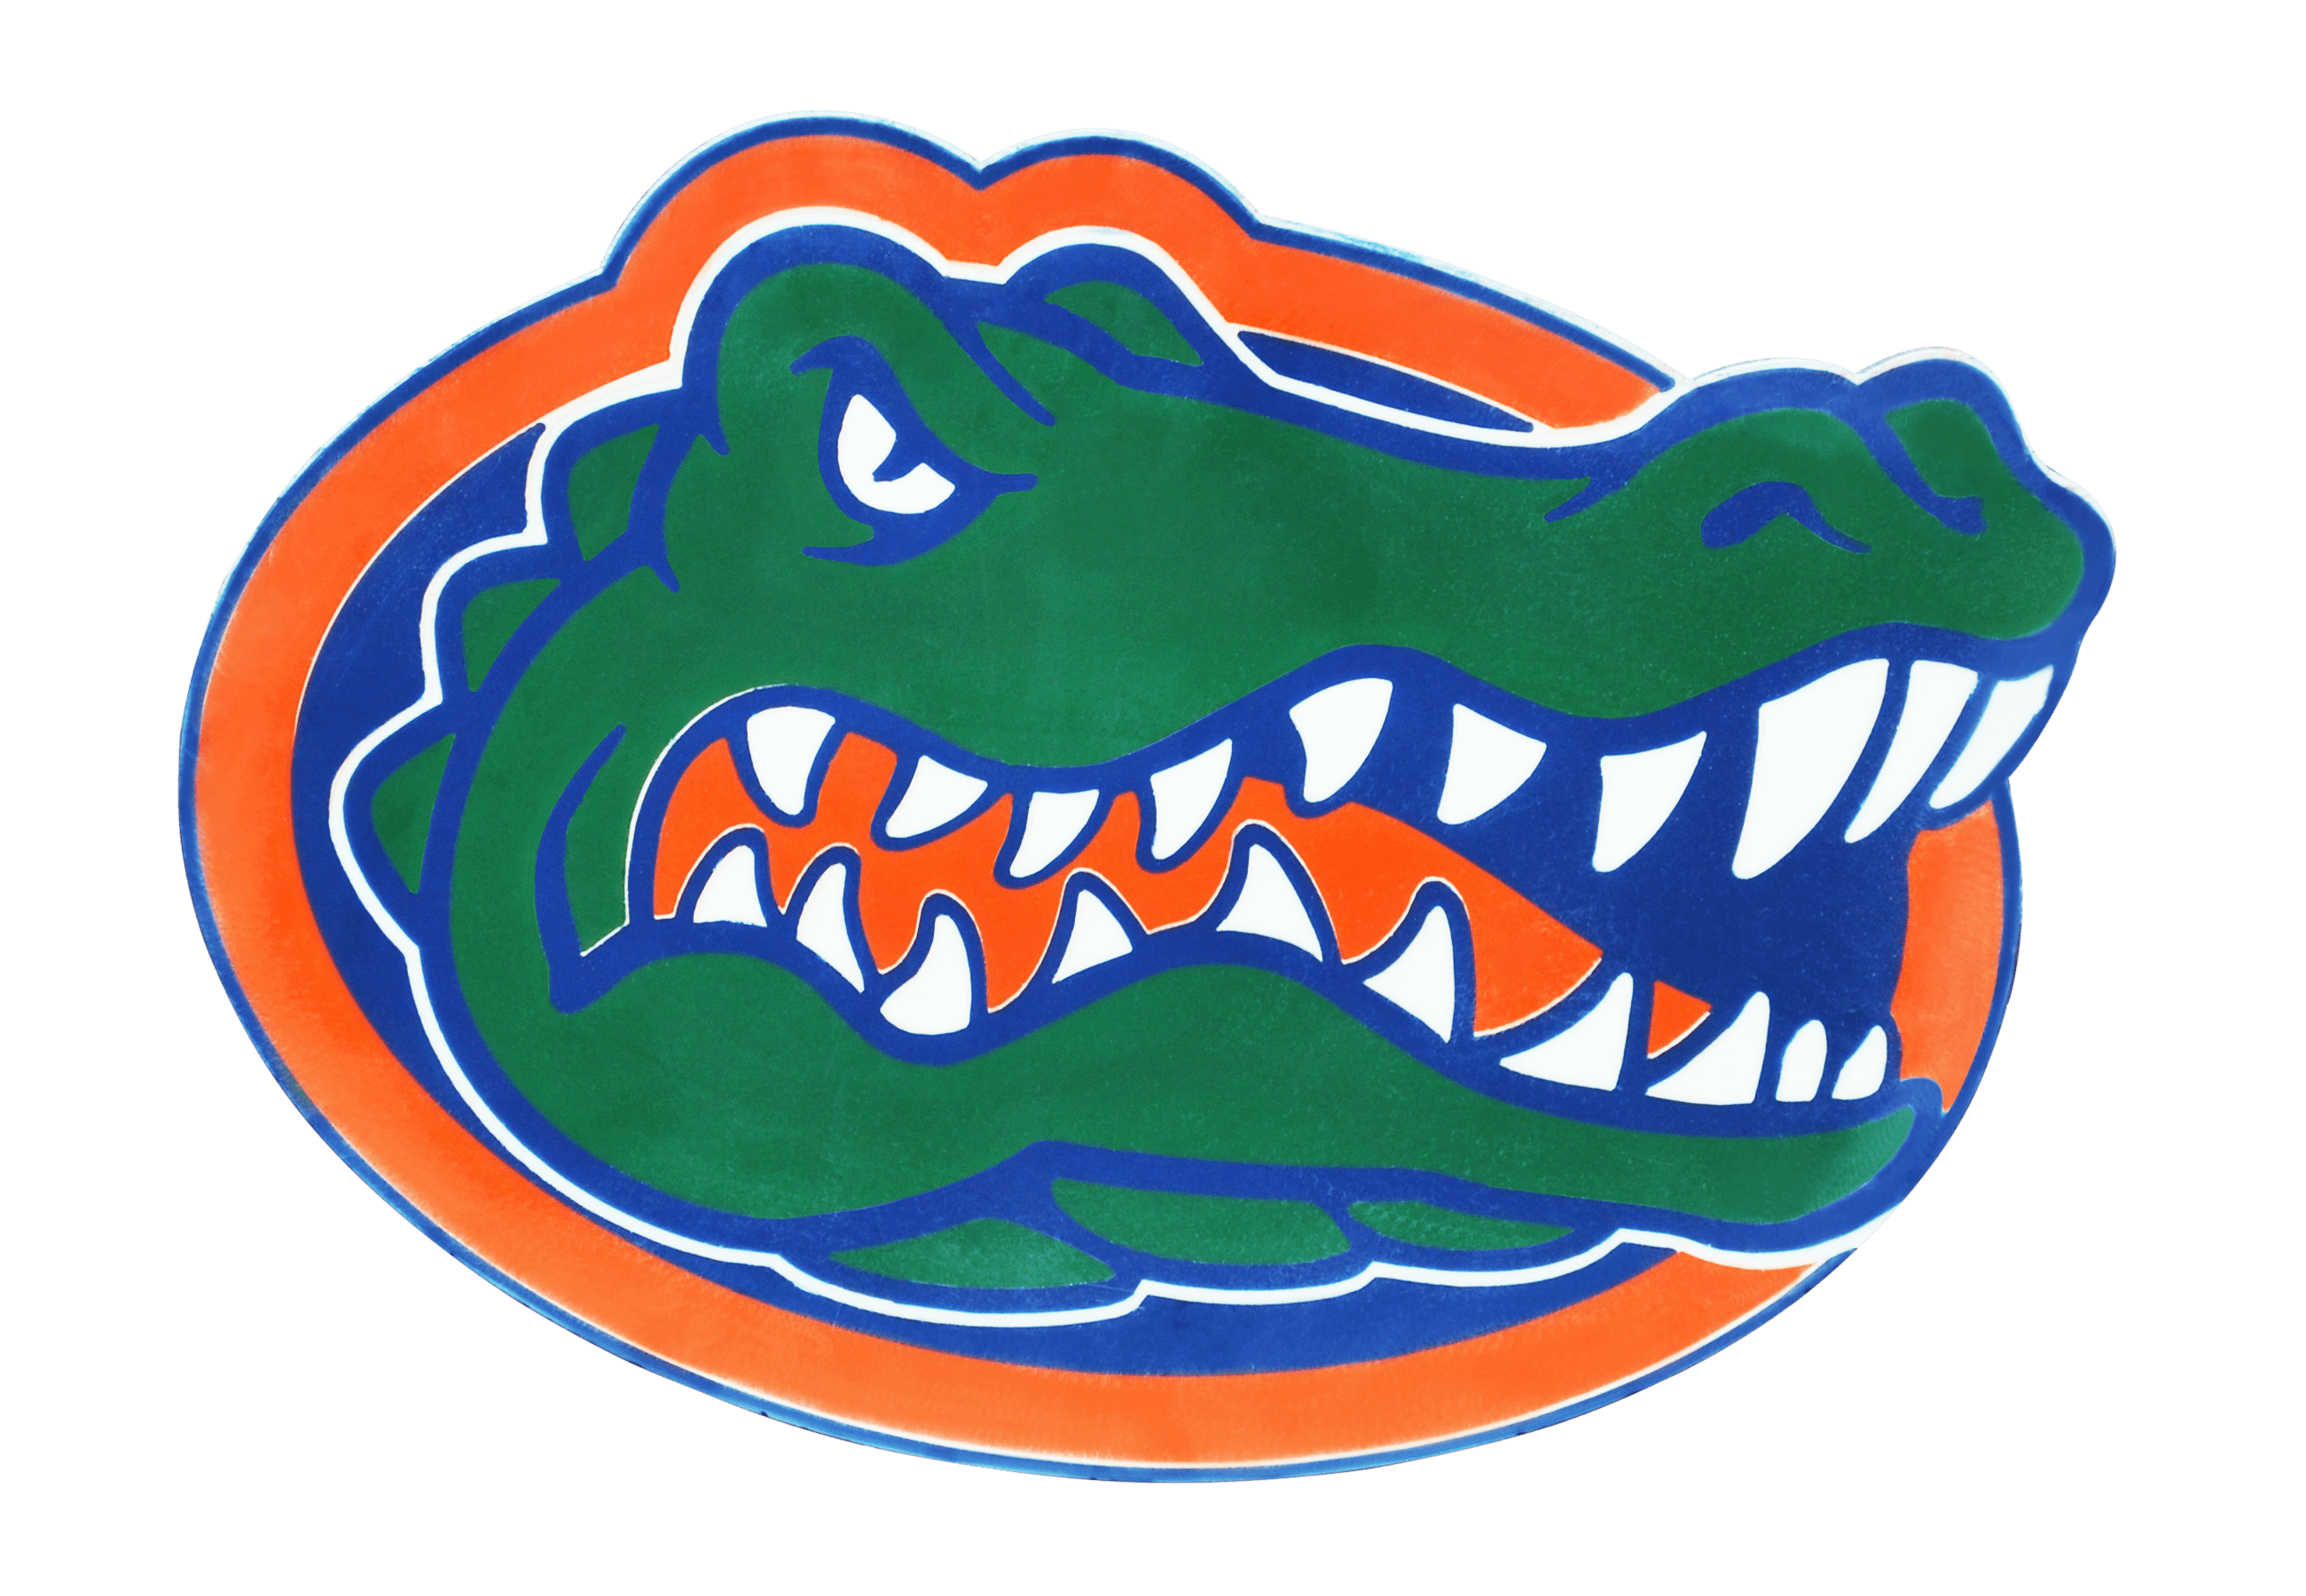 Florida Gators Logo - Florida Gators Logo, Florida Gators Symbol, Meaning, History and ...